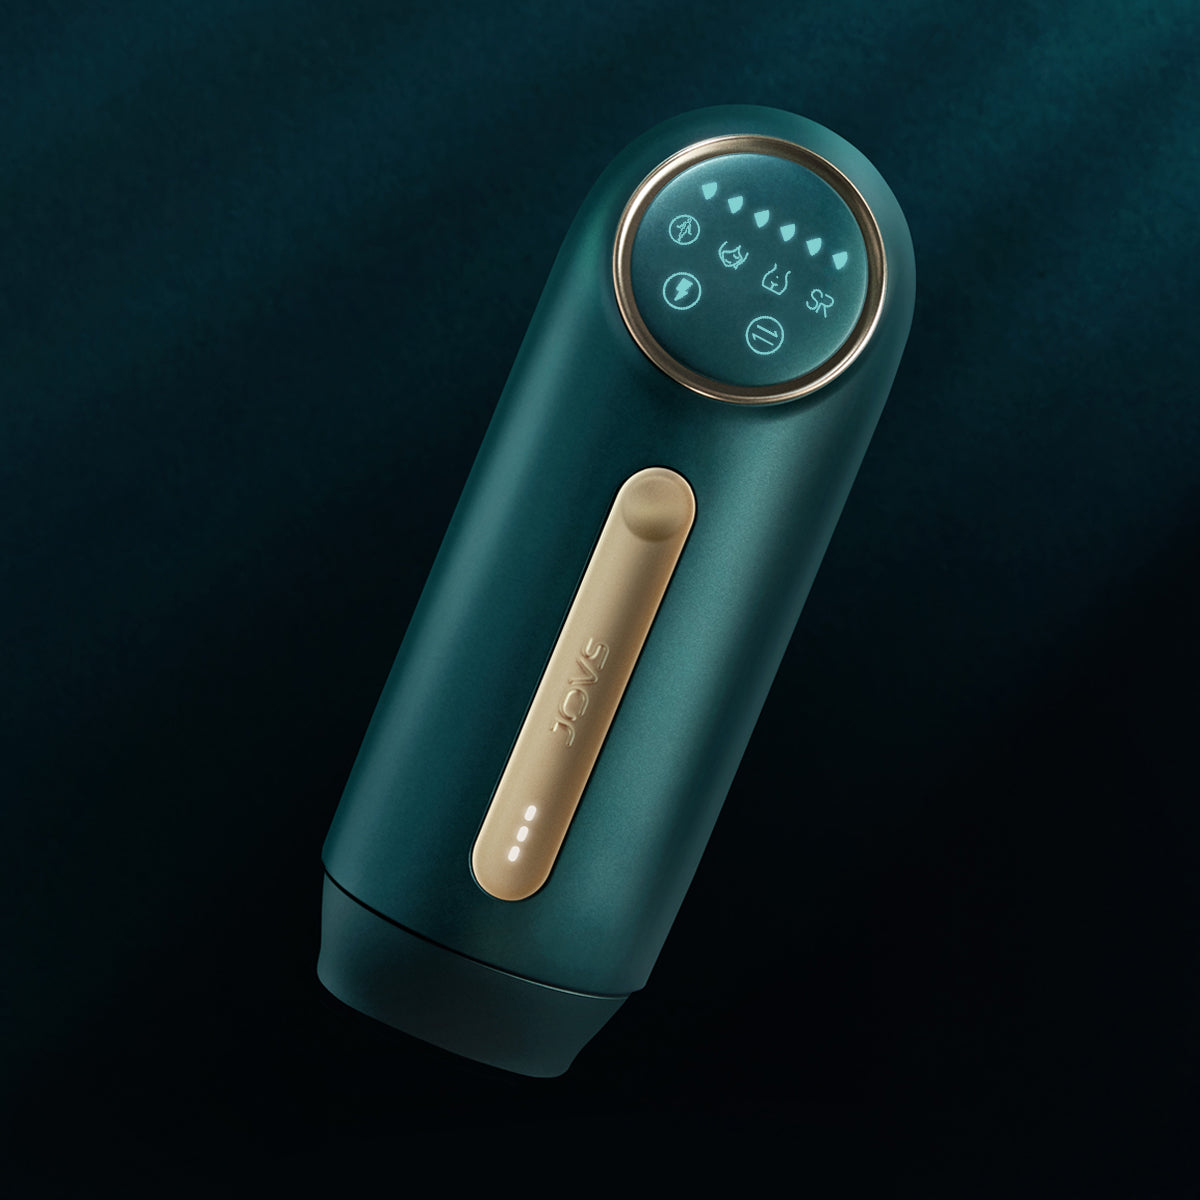 The JOVS Mini Wireless IPL Hair Removal Device is showcased in a striking teal and gold color, featuring a convenient touch control panel for easy operation.